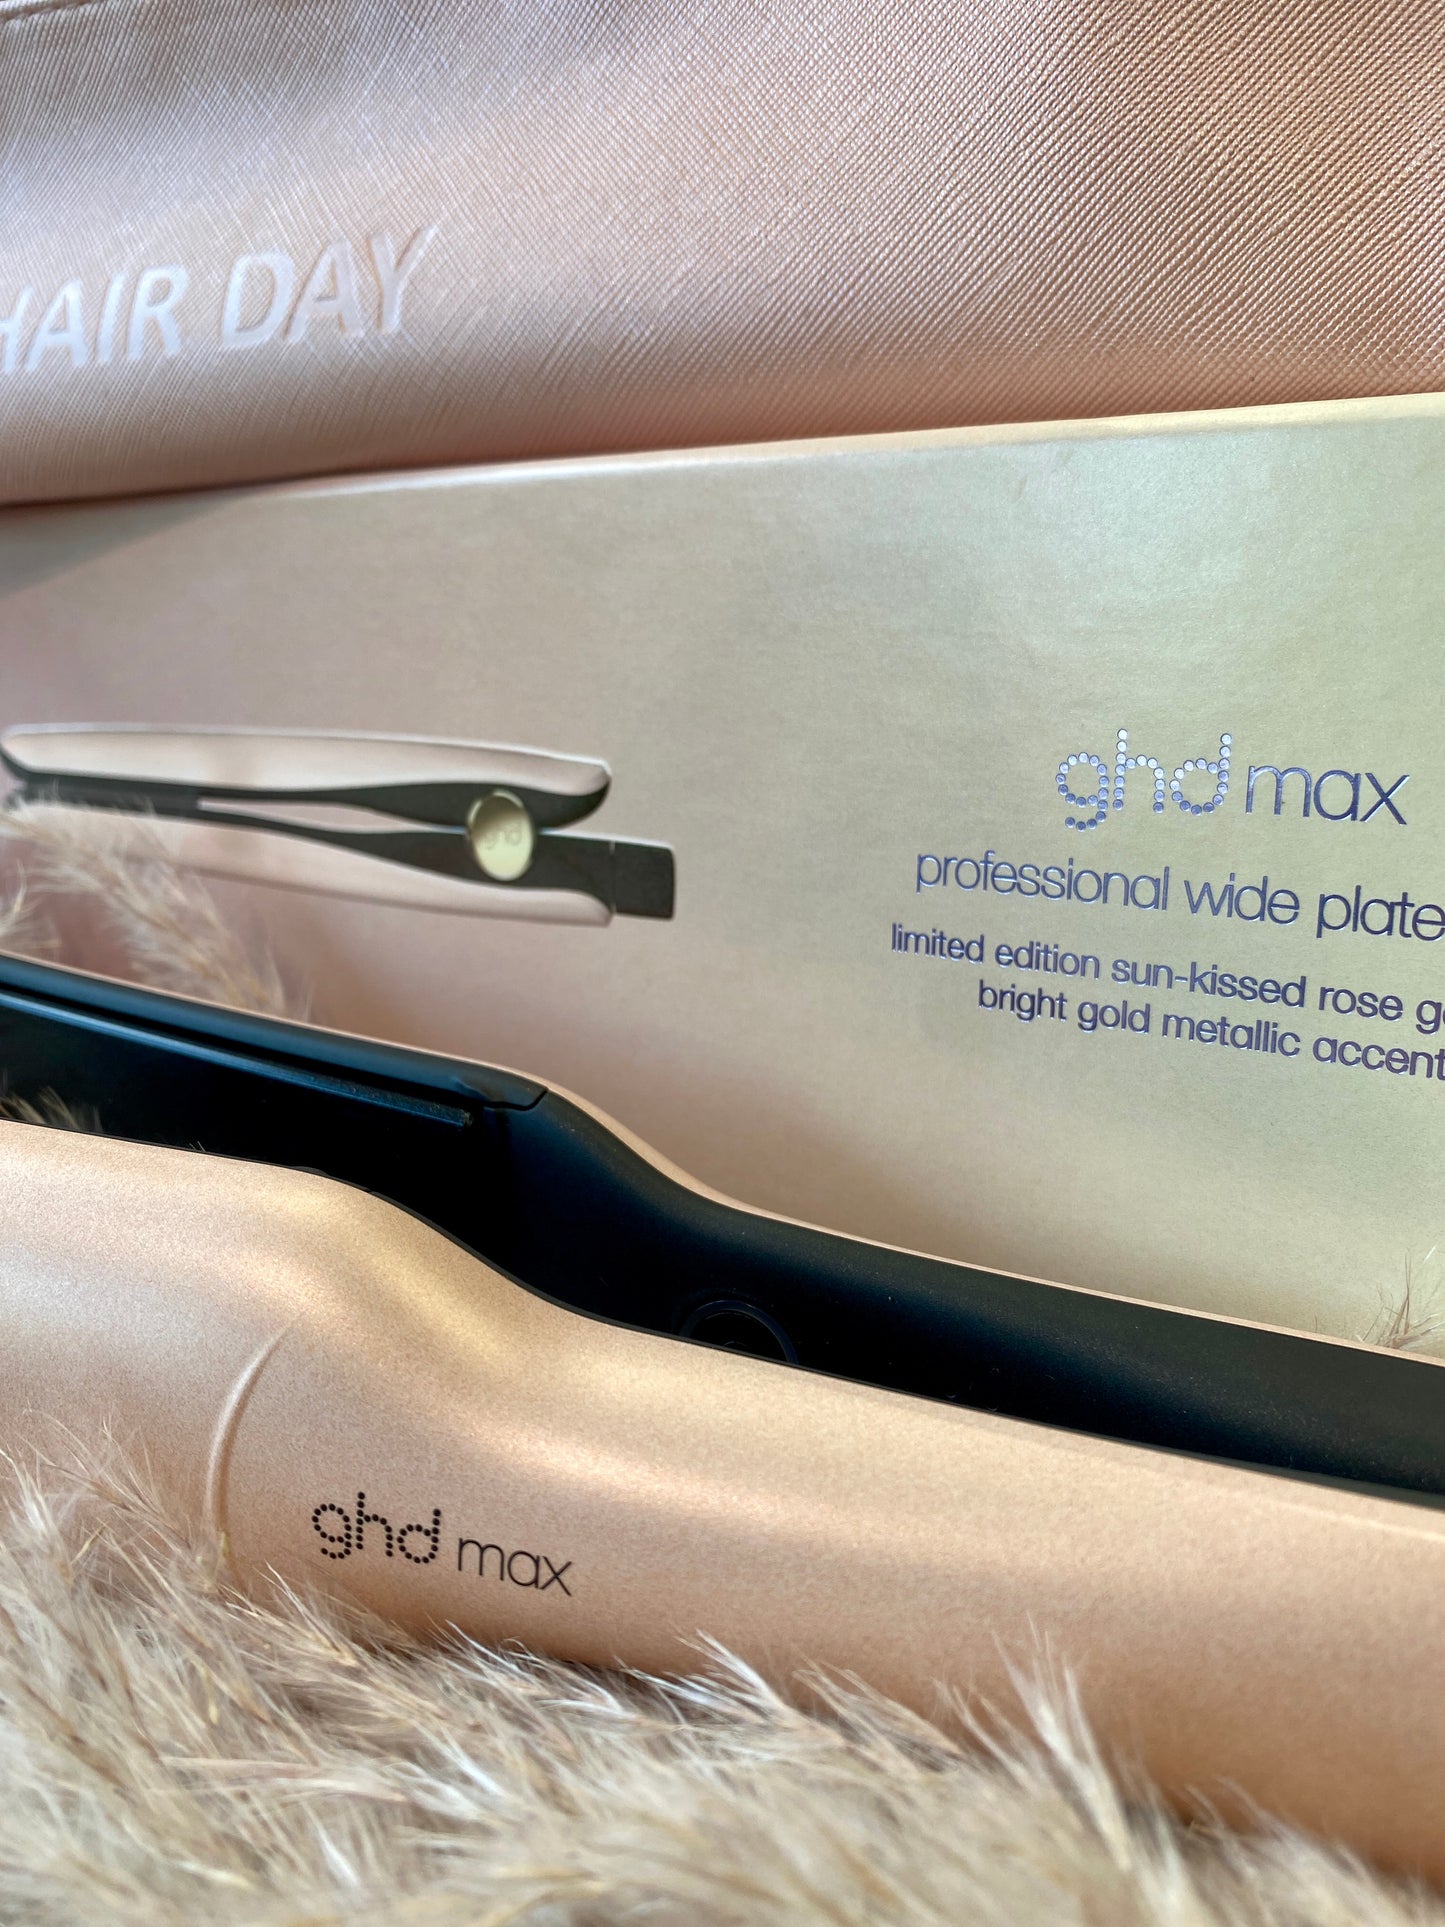 ghd Sun Kissed Limited Edition Max Styler